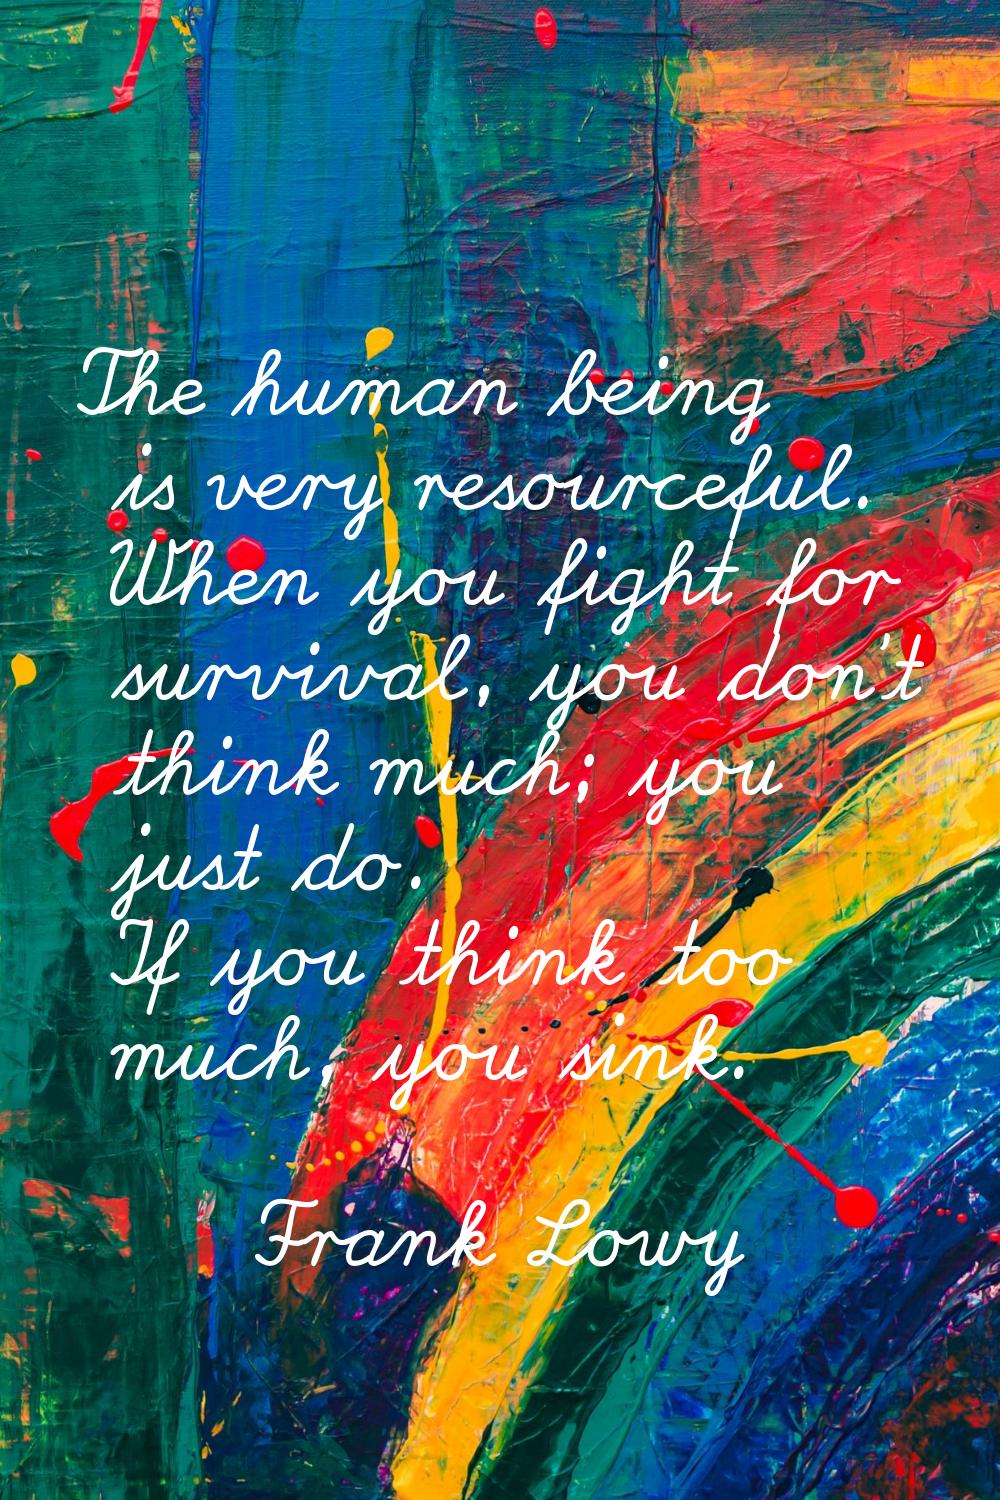 The human being is very resourceful. When you fight for survival, you don't think much; you just do